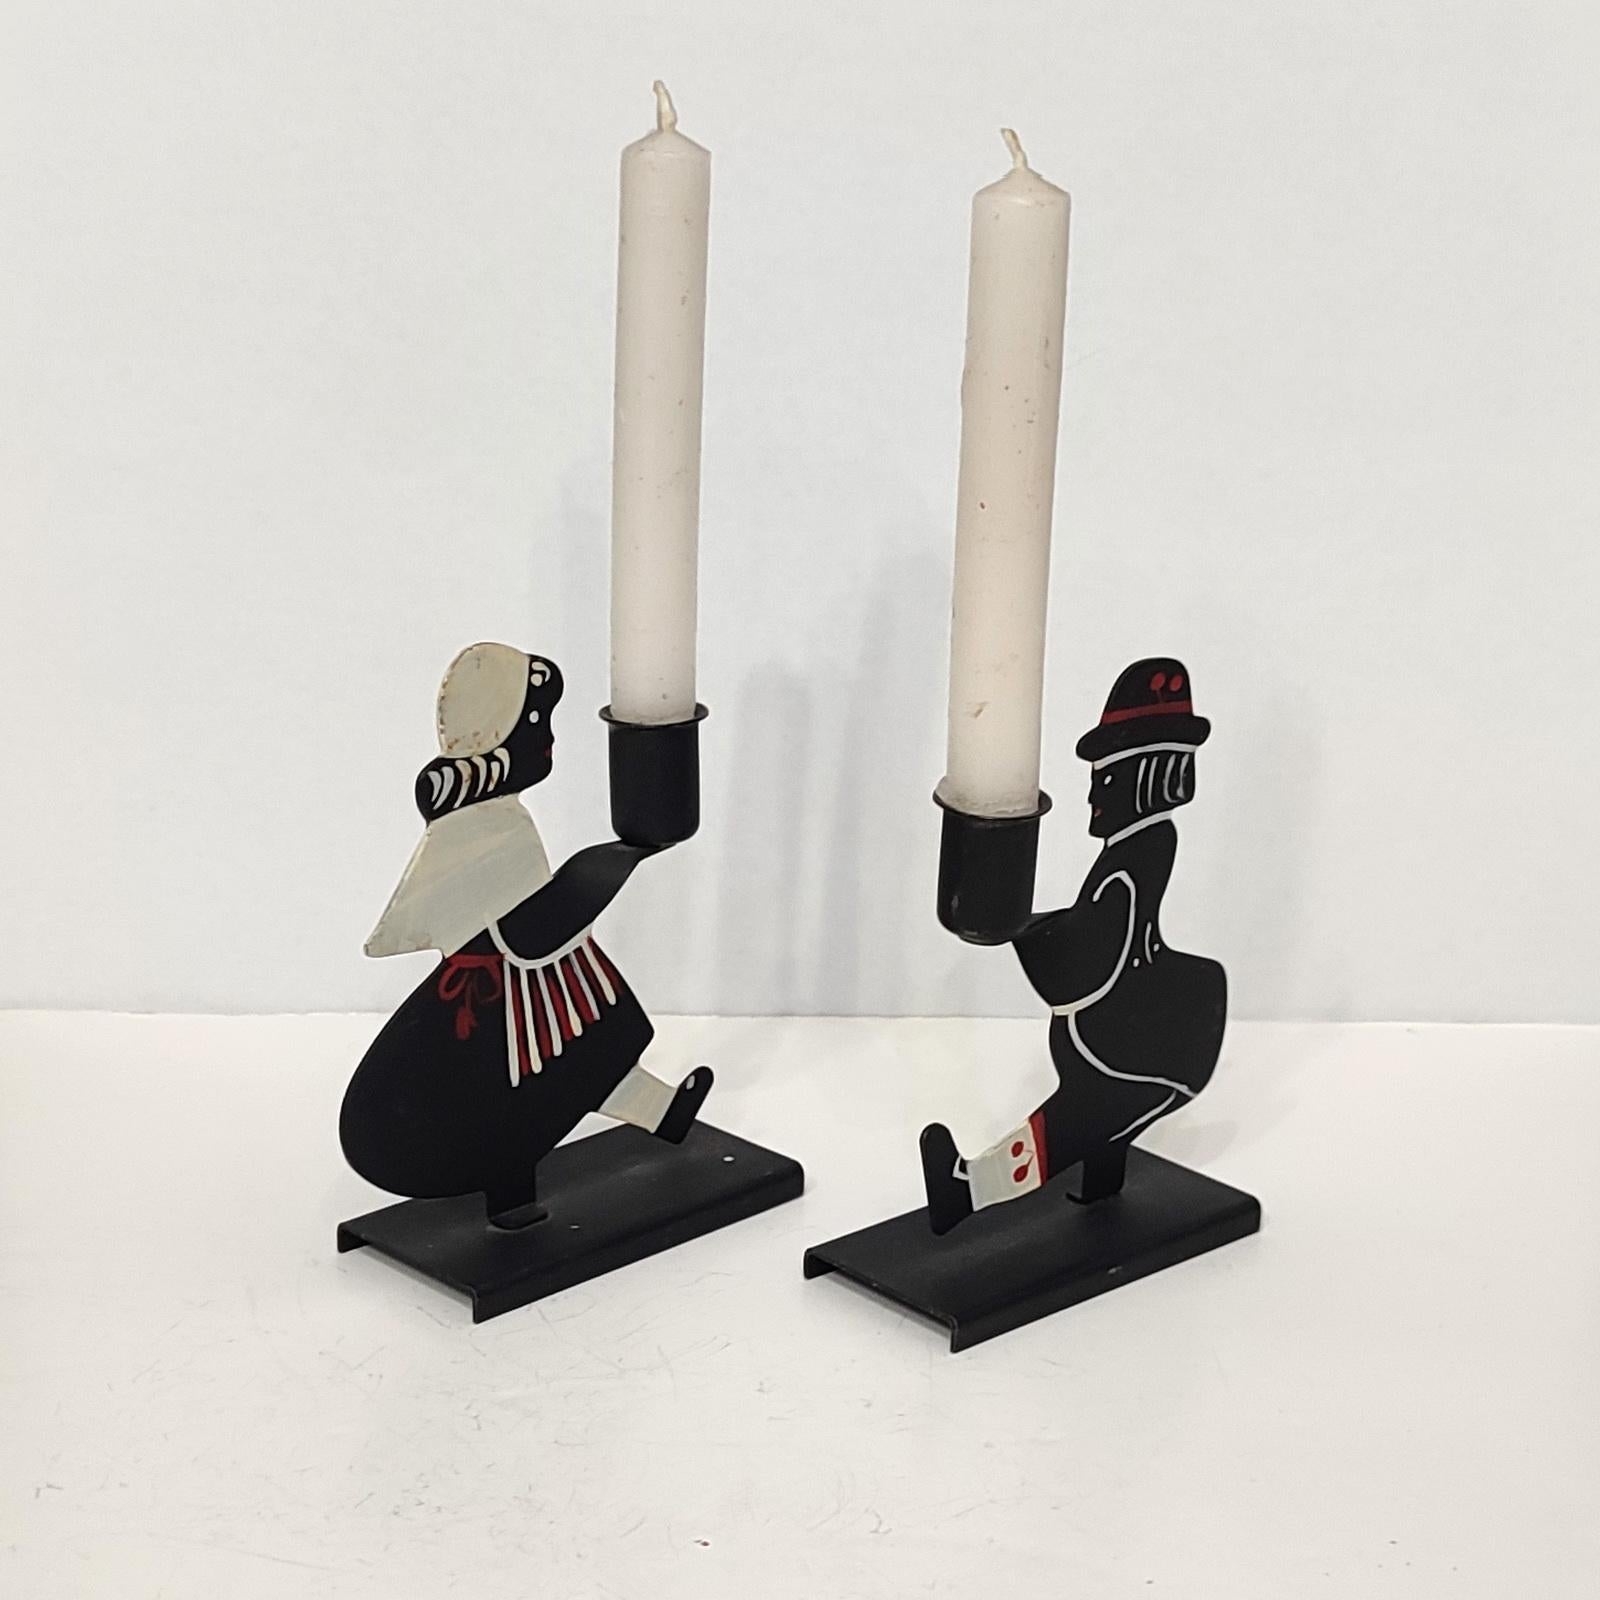 Lovely pair of candlesticks depicting a couple dressed in folk clothes, each holding a sconce. Small, for 1 cm candles, perfect for a private dinner for two. Each marked and dated 1960 on the bottom.
Good overall condition, minor fading to the